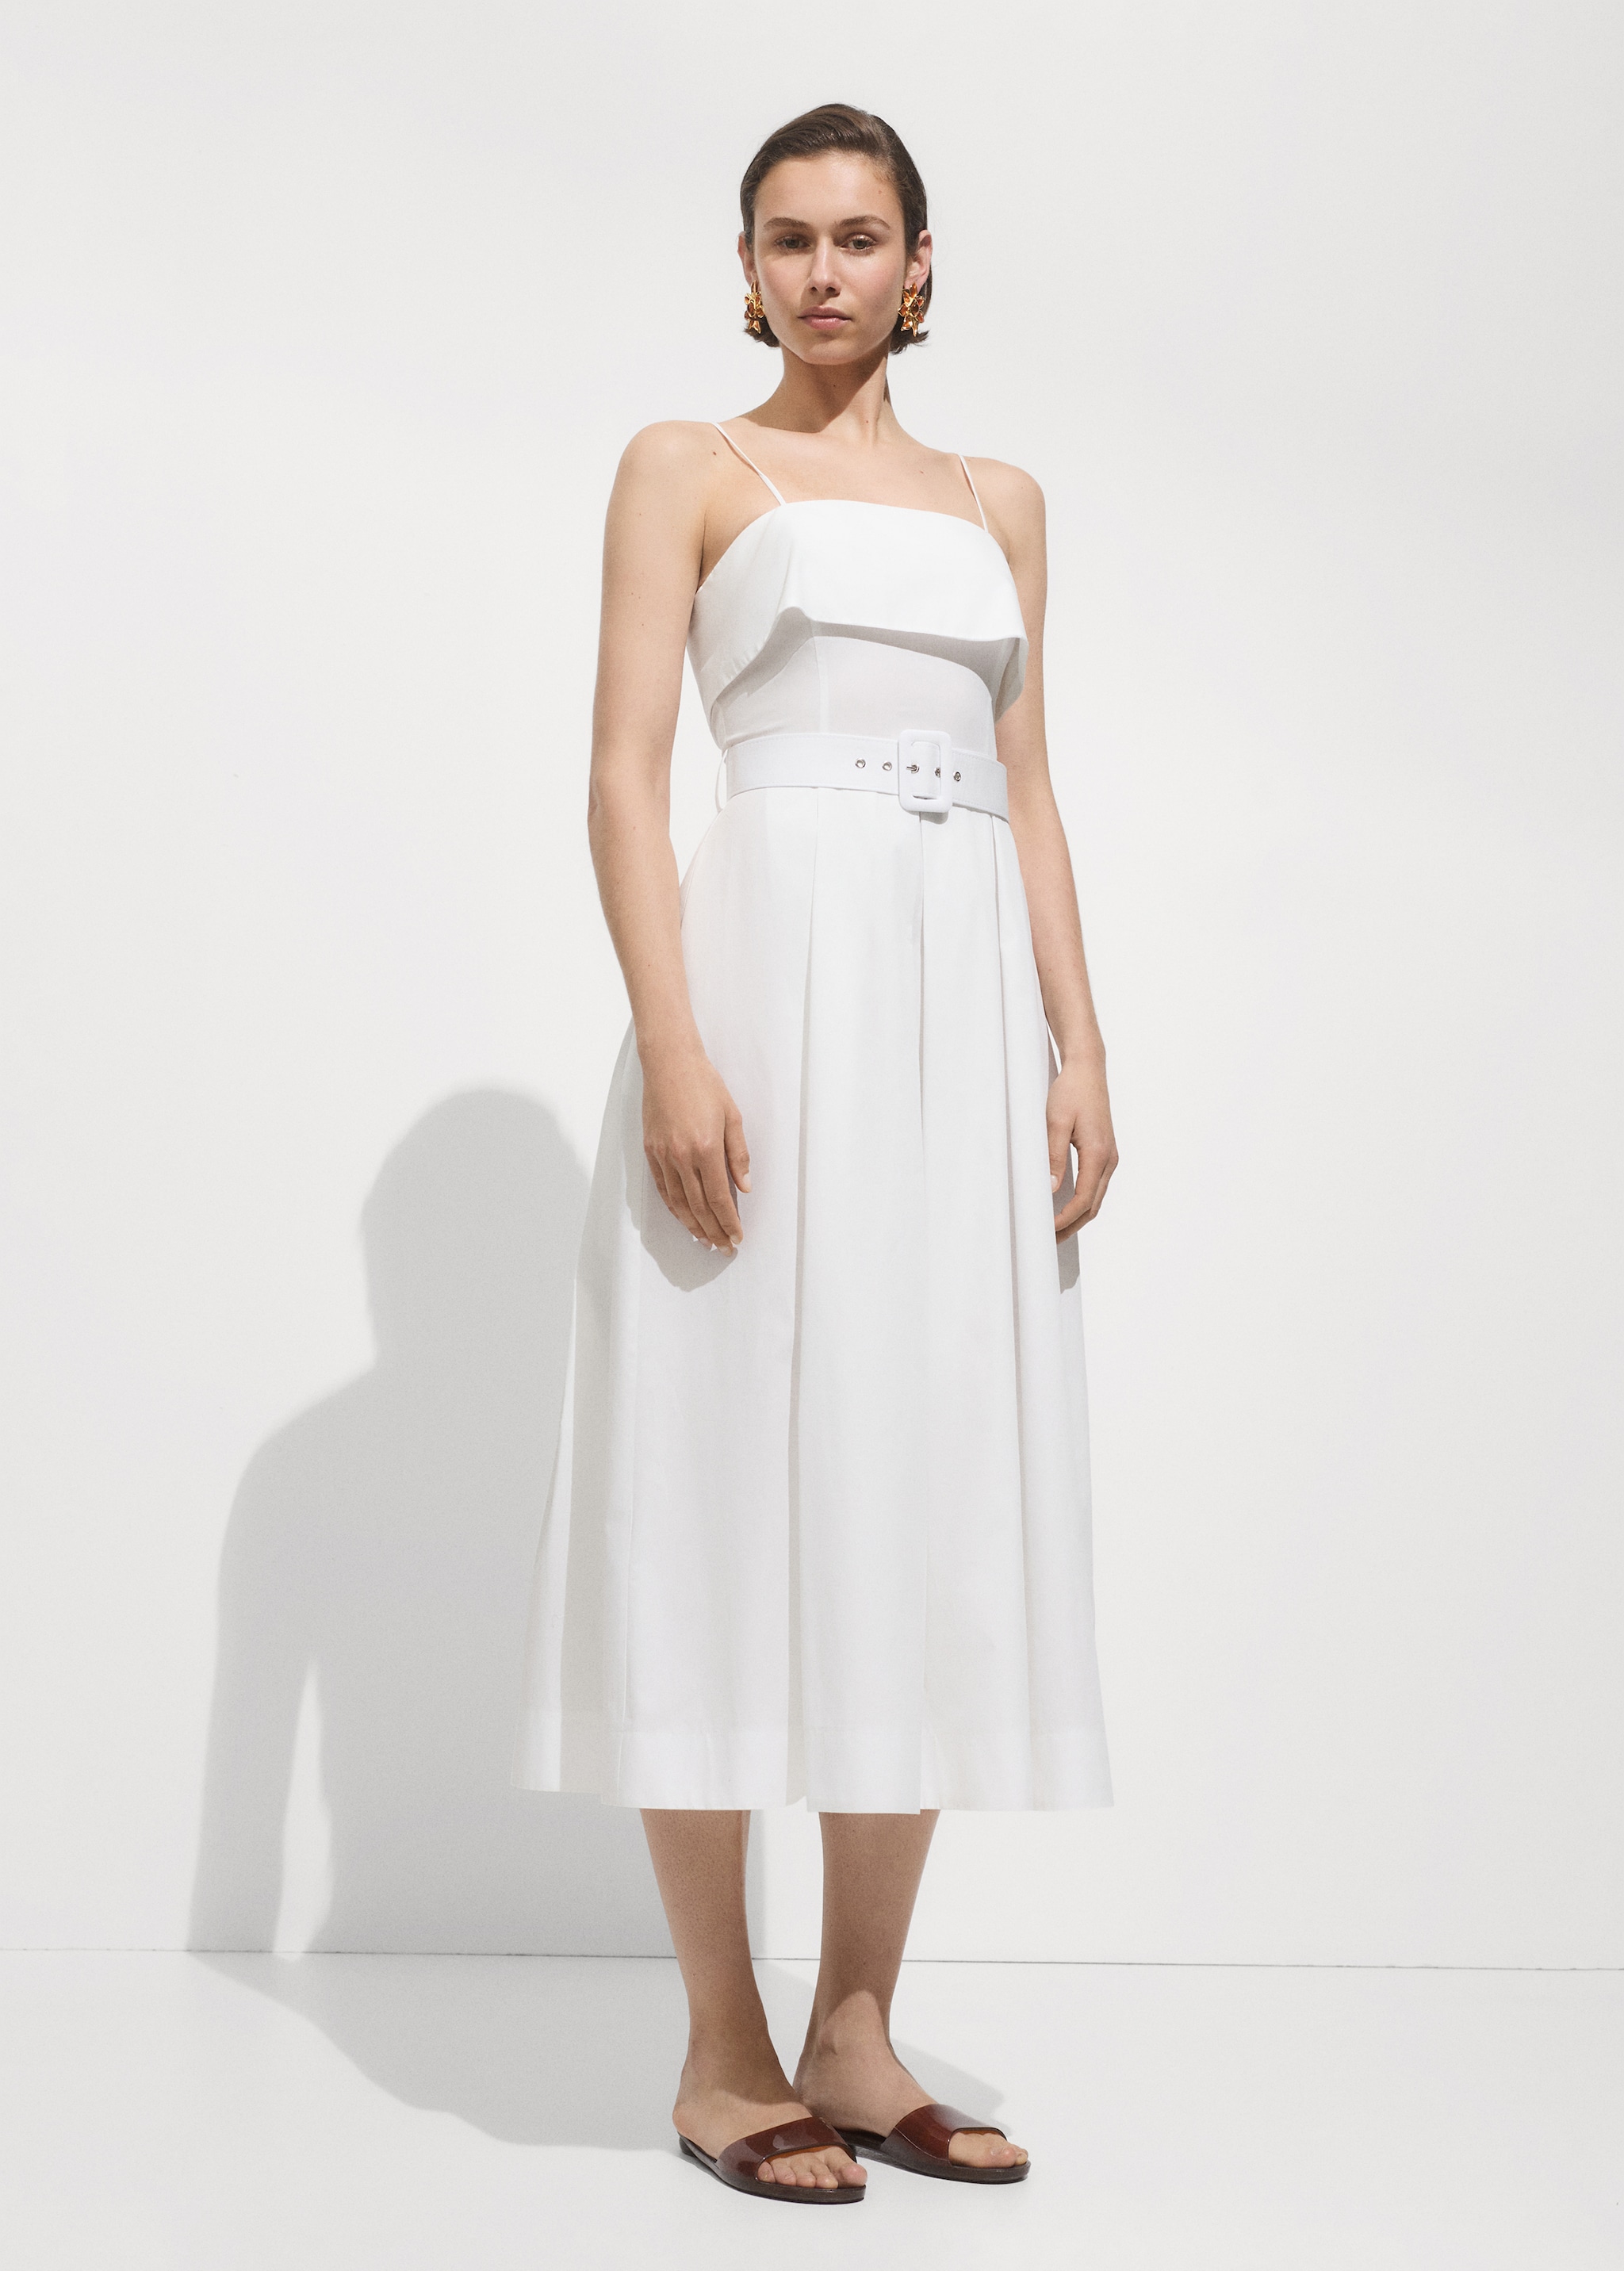 Dress With a Belted Neckline